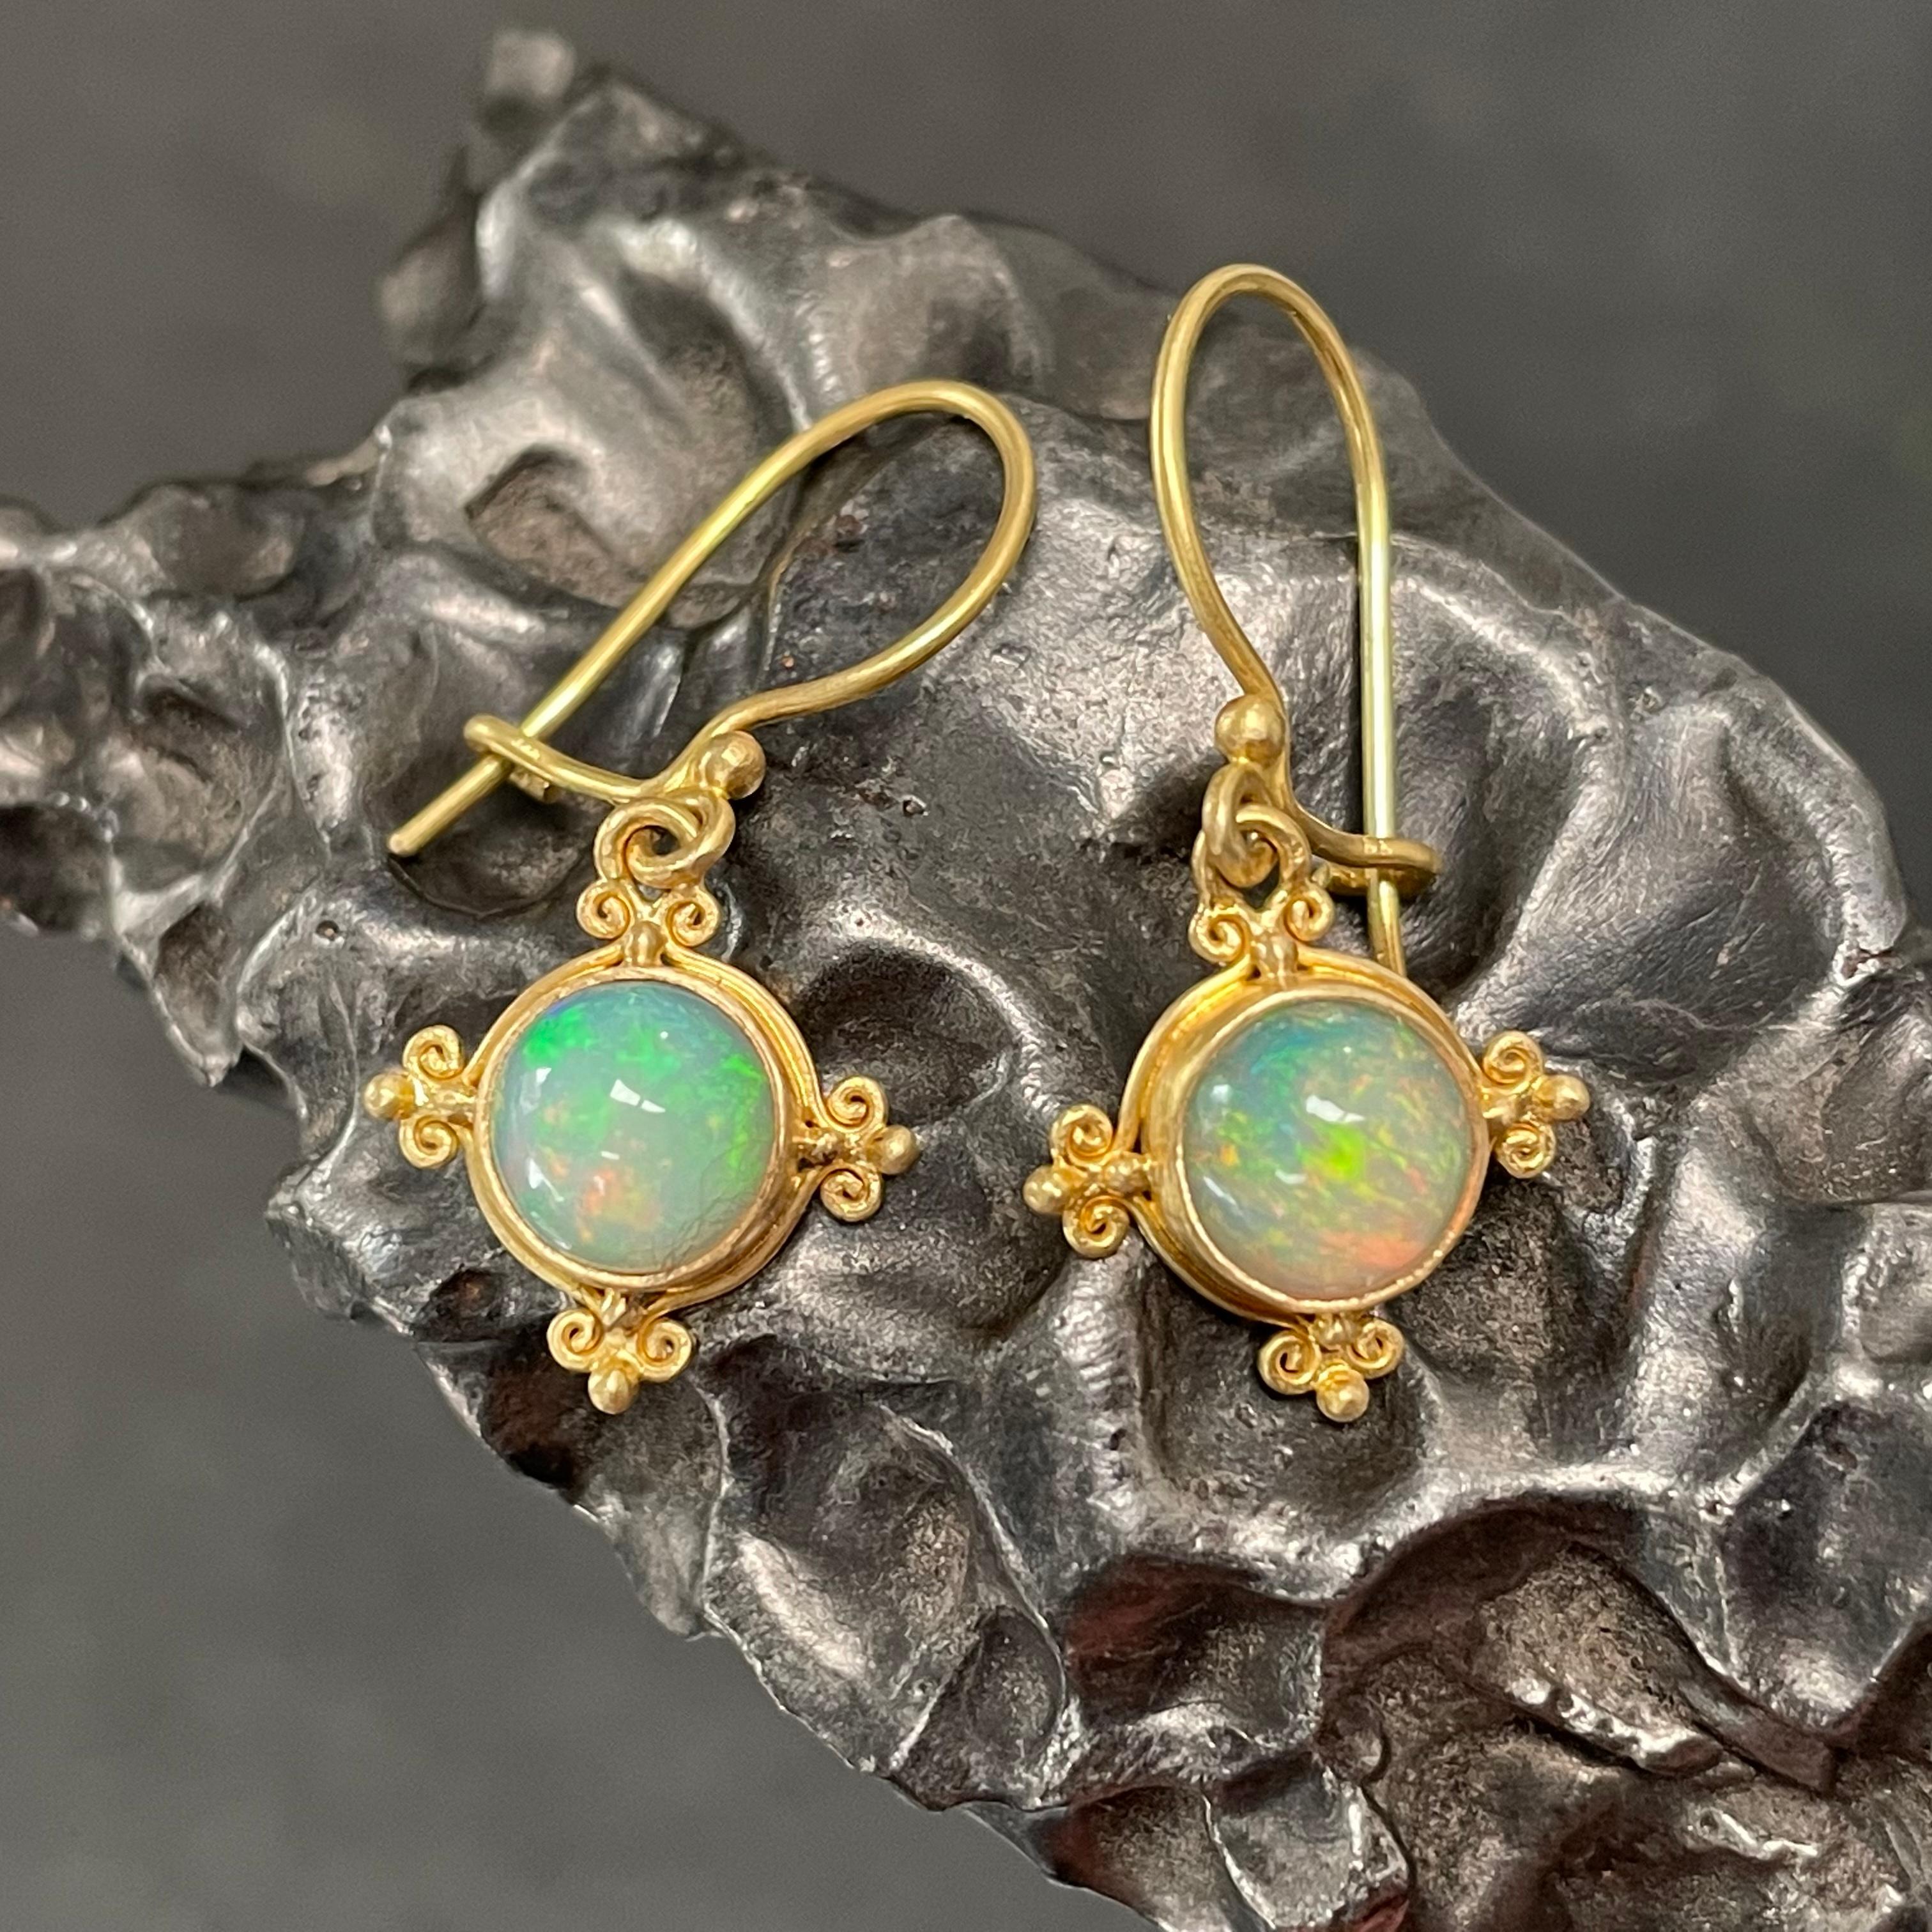 Two nicely matched 7 mm round cabochons of Welo mine Ethiopian opal are set in delicate handmade 